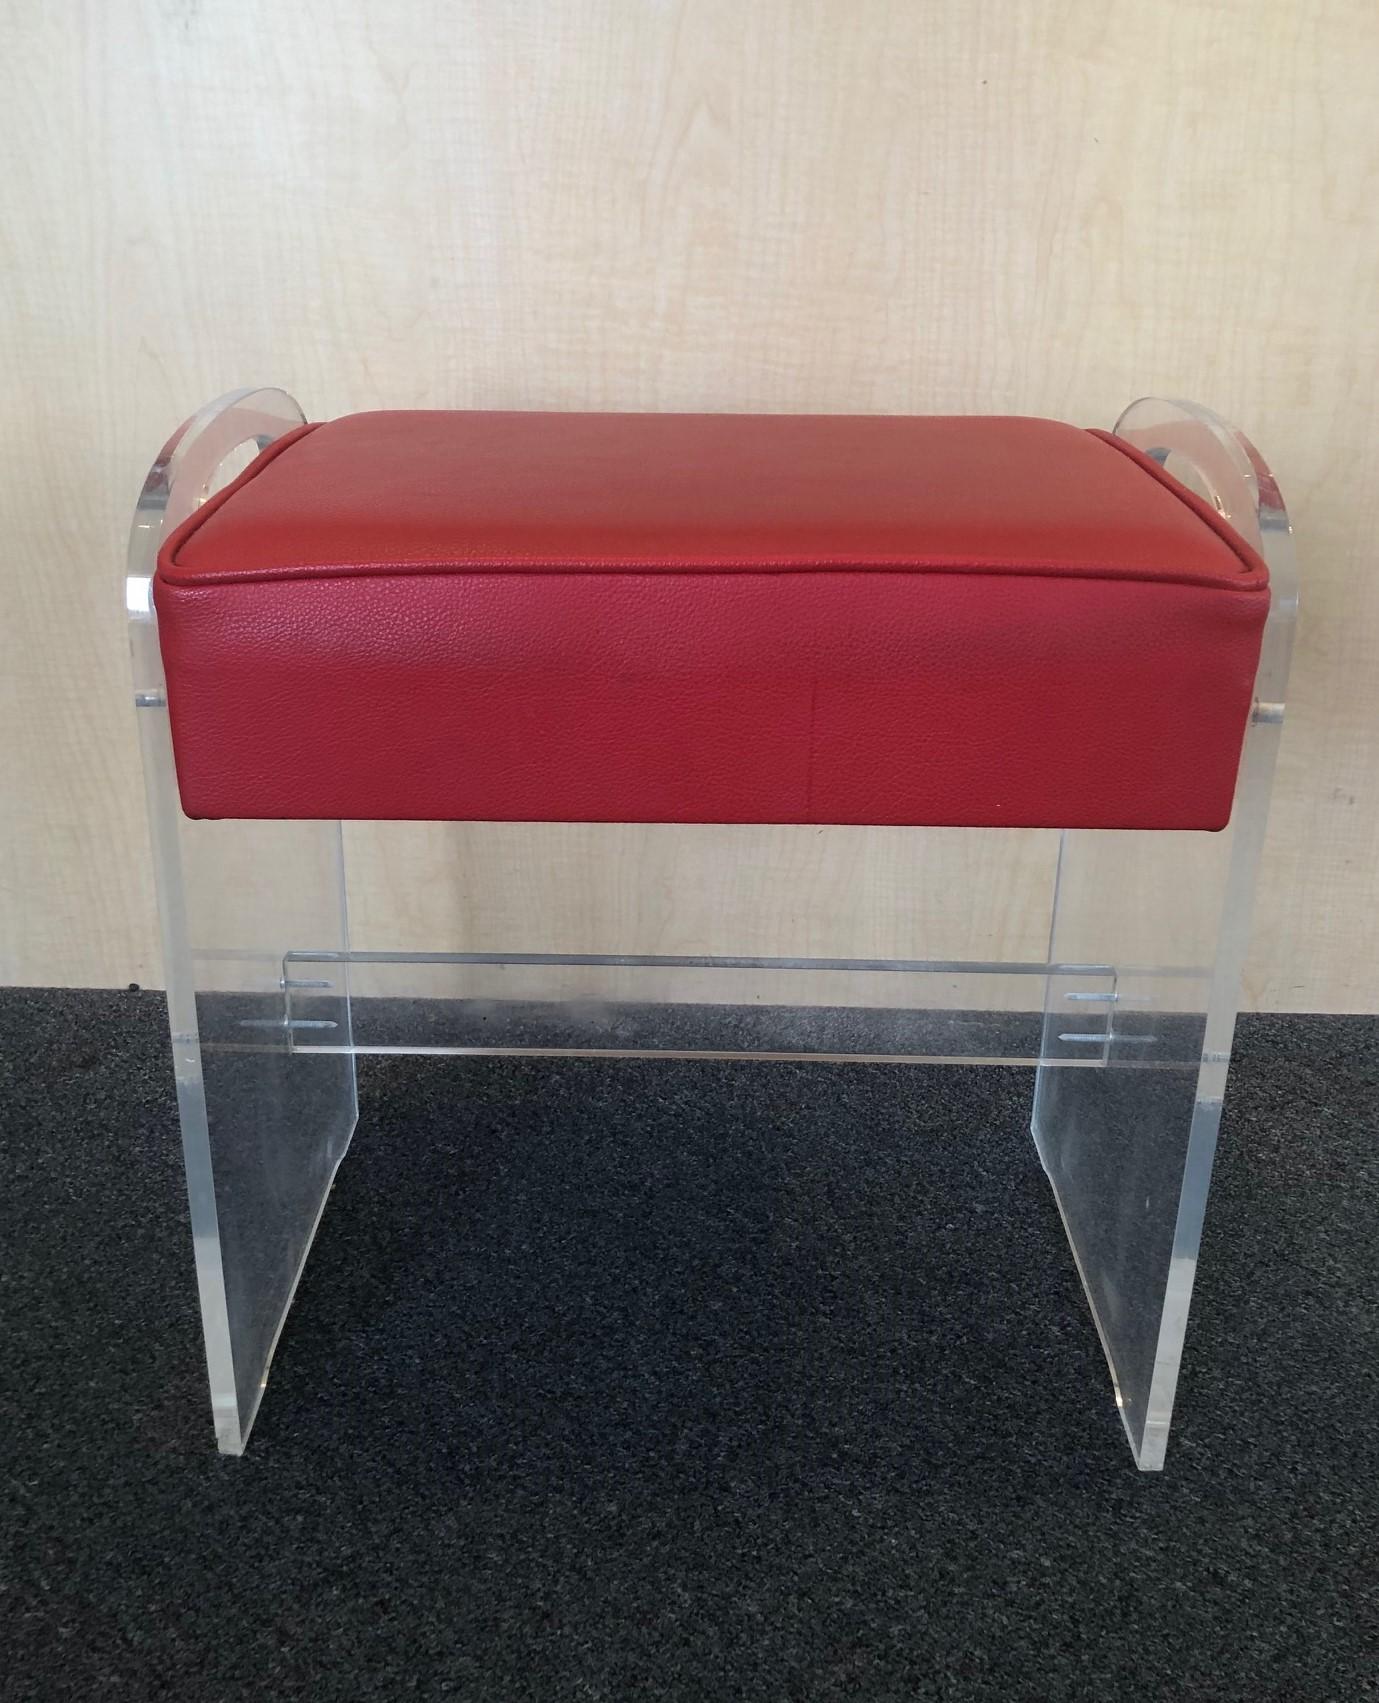 Postmodern Minimalist Lucite and red Naugahyde vanity stool with side handles, circa 1970s. The piece is in good vintage condition; very solid and stabile. There some scratches and crazing to the Lucite.